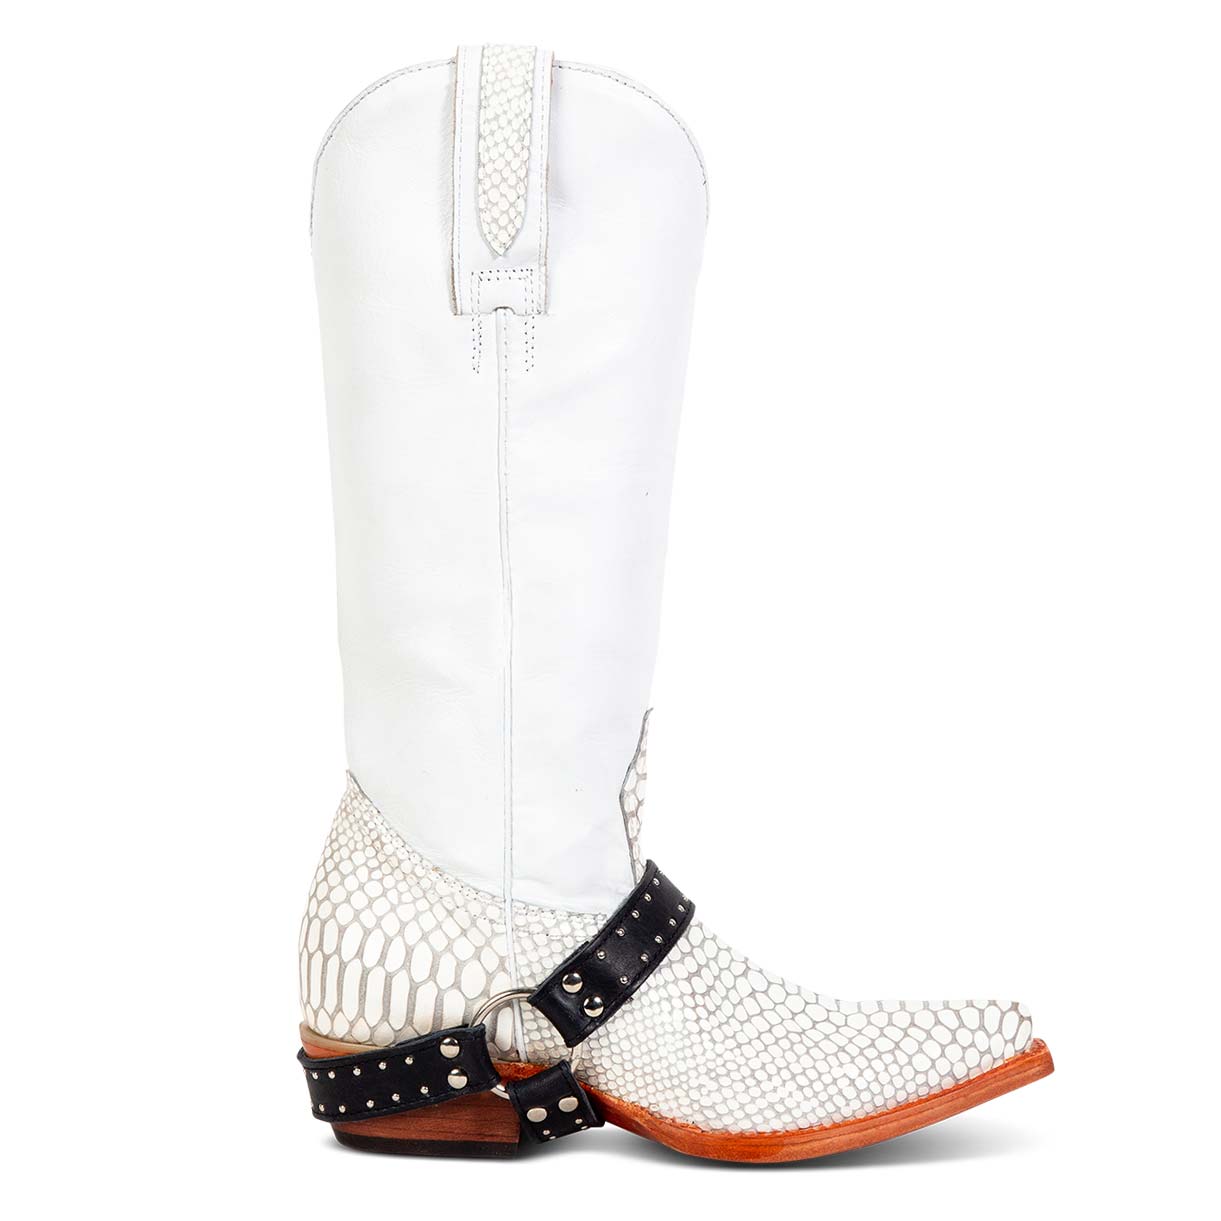 FREEBIRD women's Lusitano white snake western boot with embellished harness and snip toe